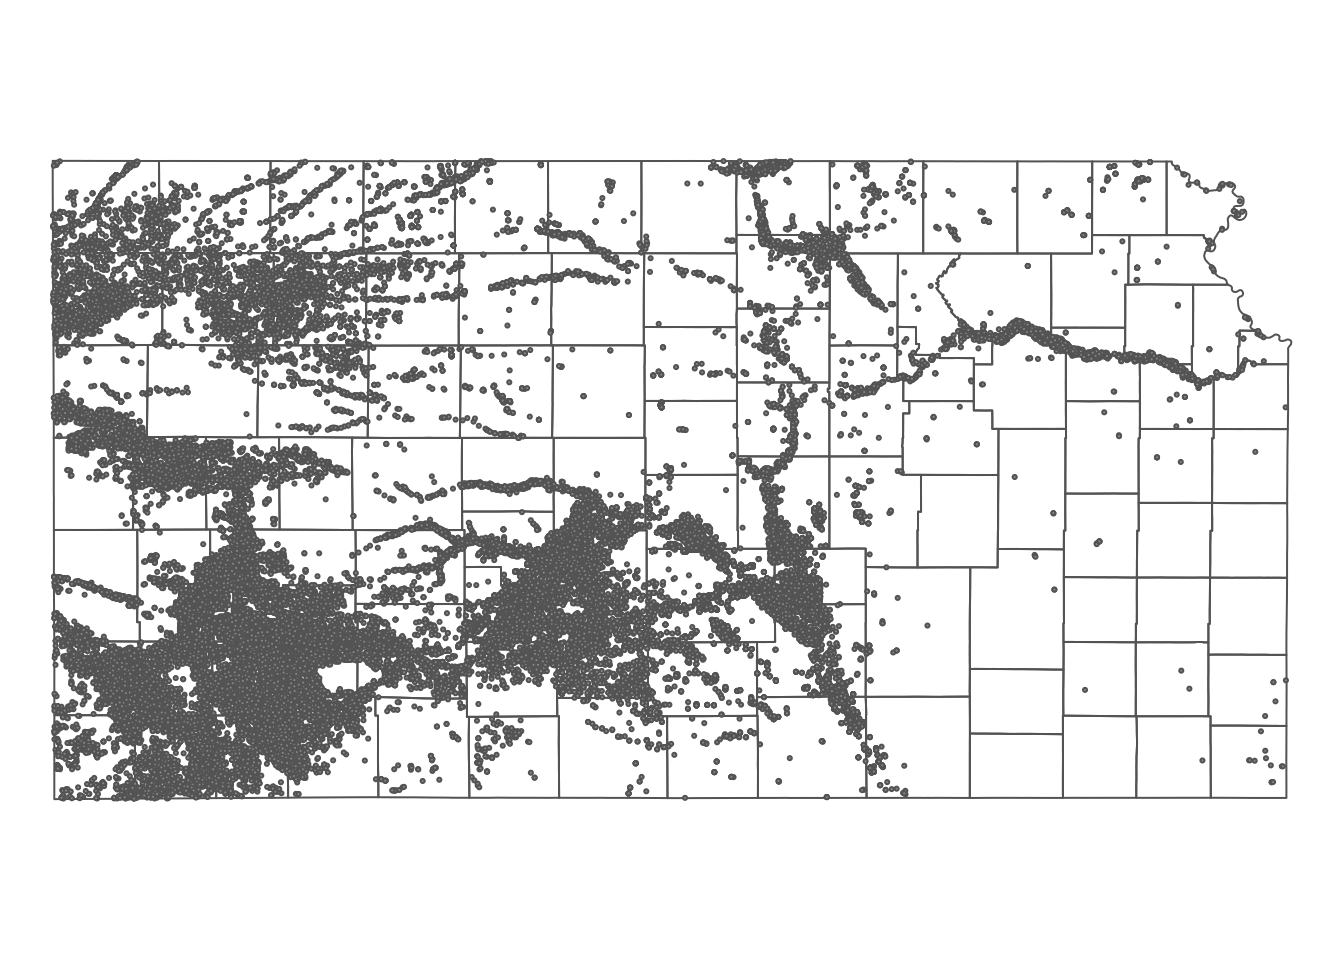 Map of Kansas county borders, irrigation wells, and PRISM tmax